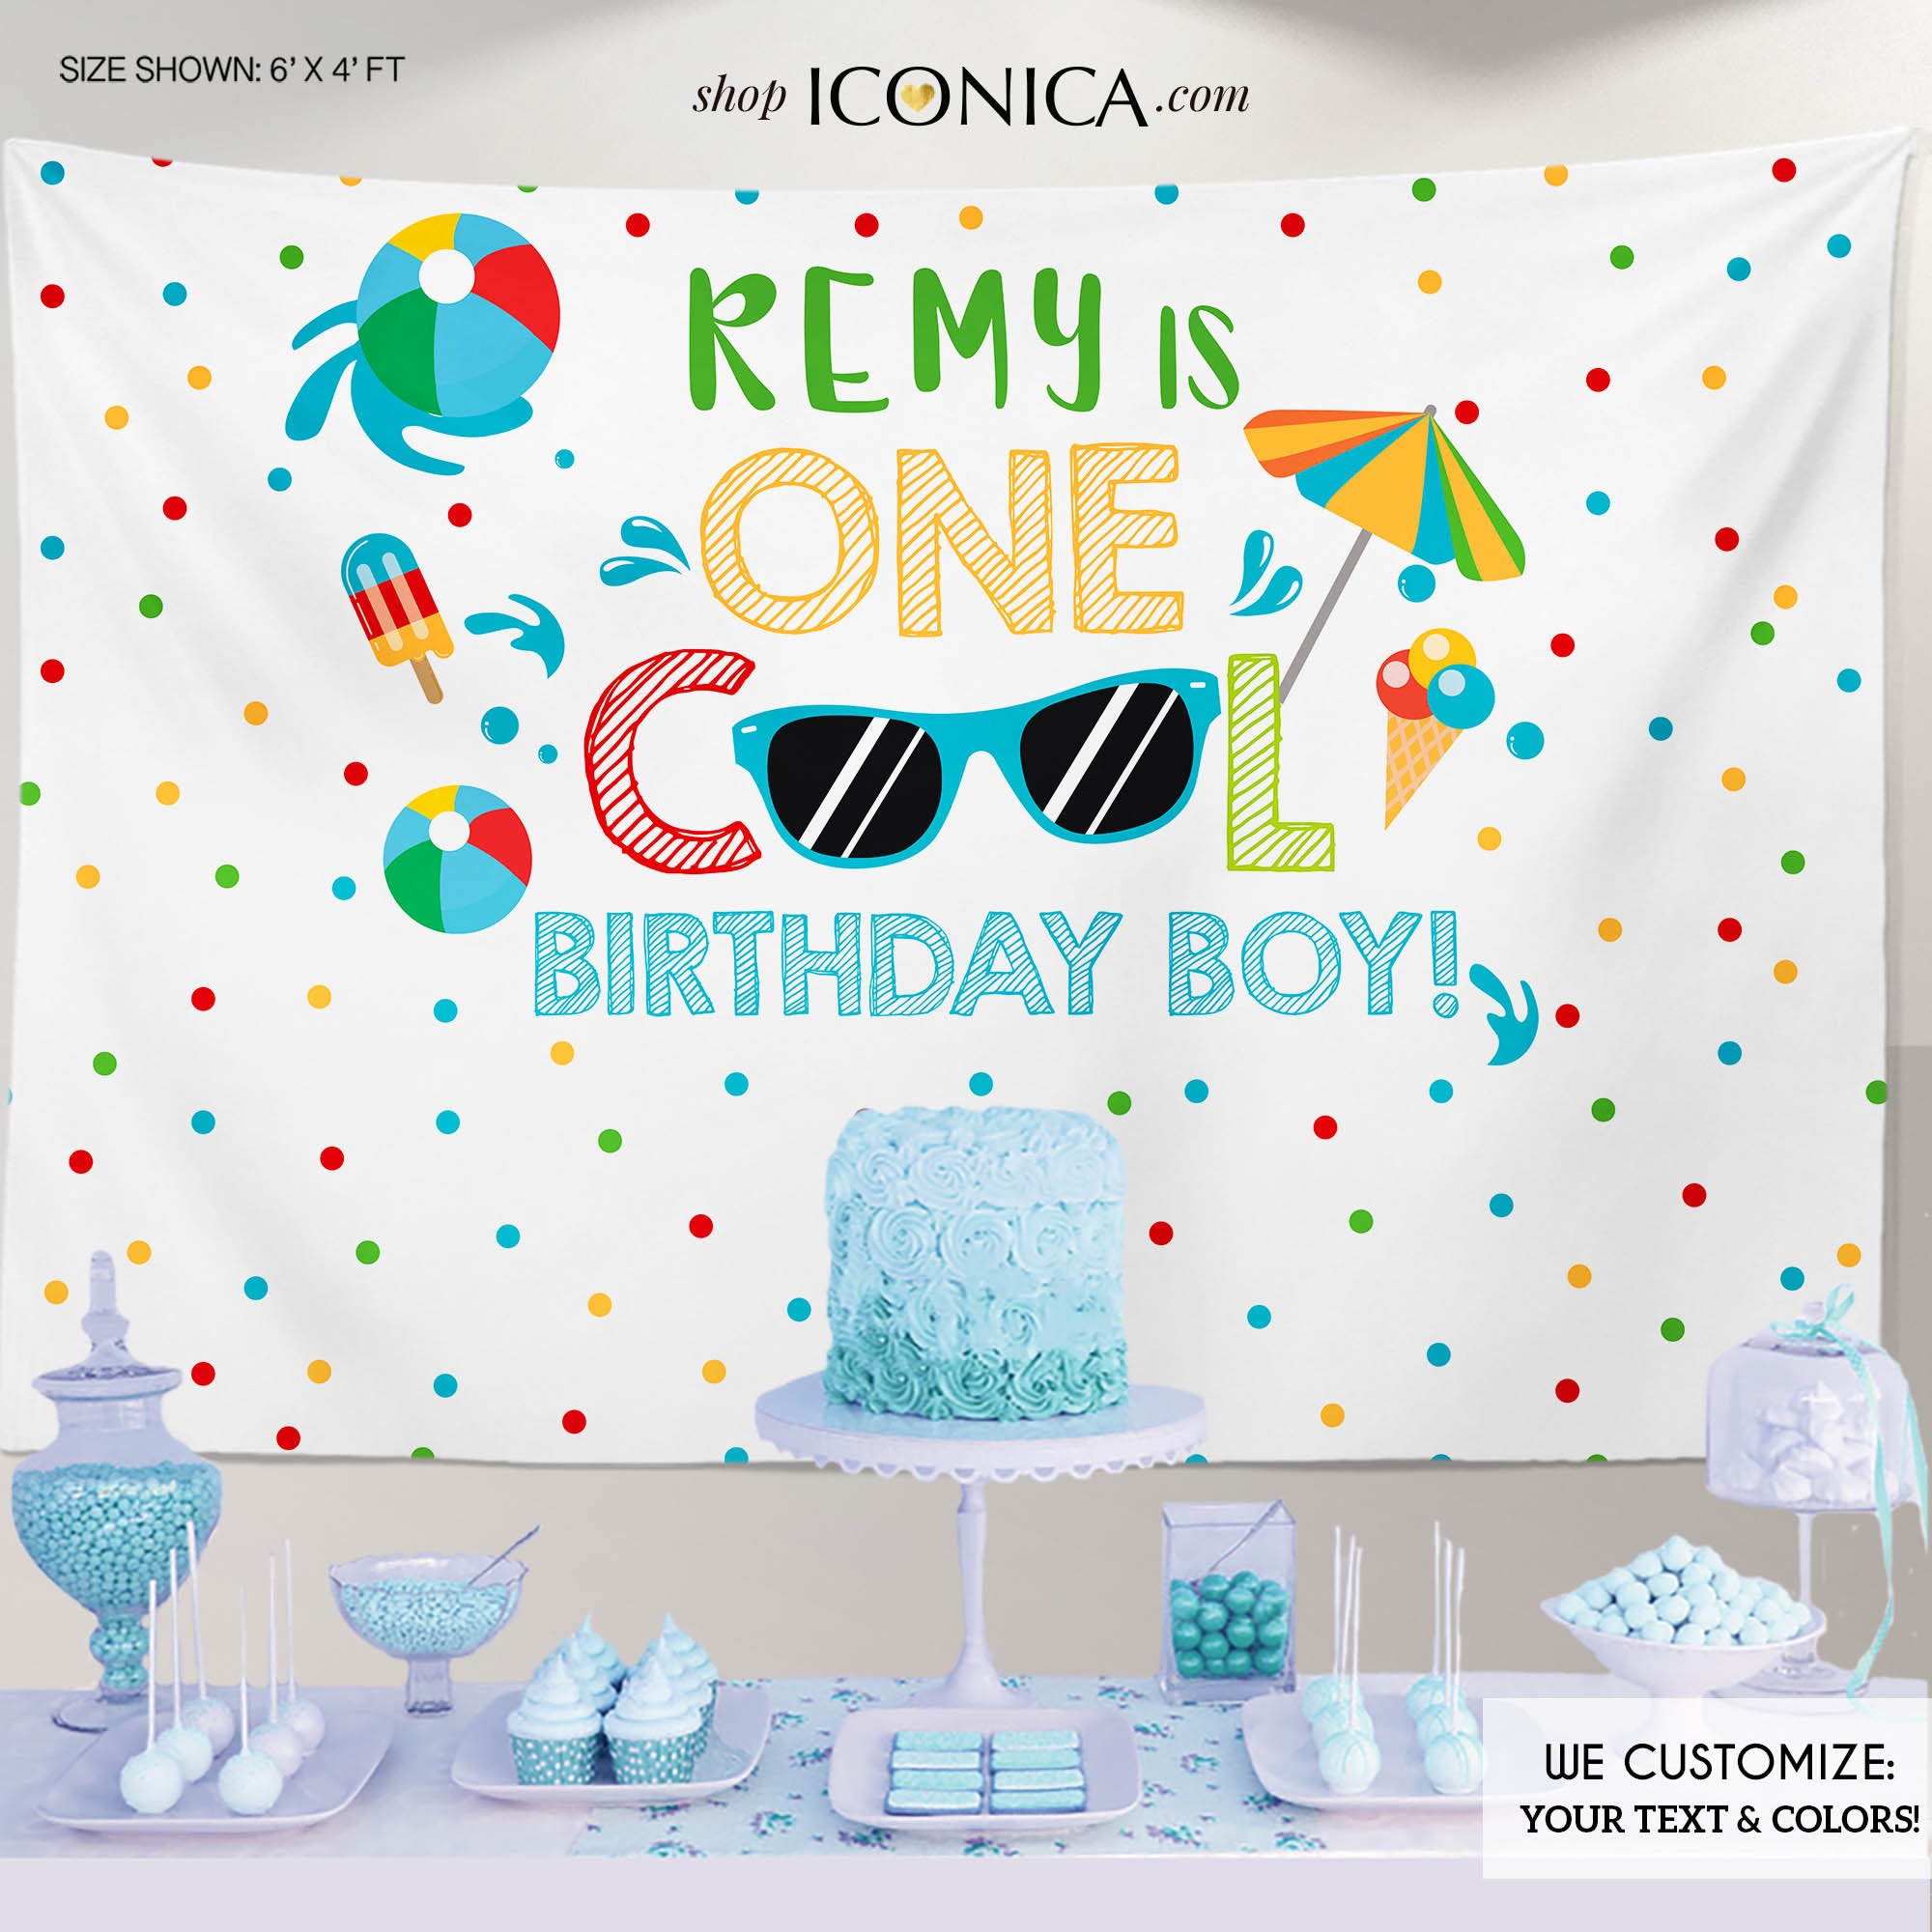 Pool party backdrop,Pool party decorations,ONE COOL Birthday Boy